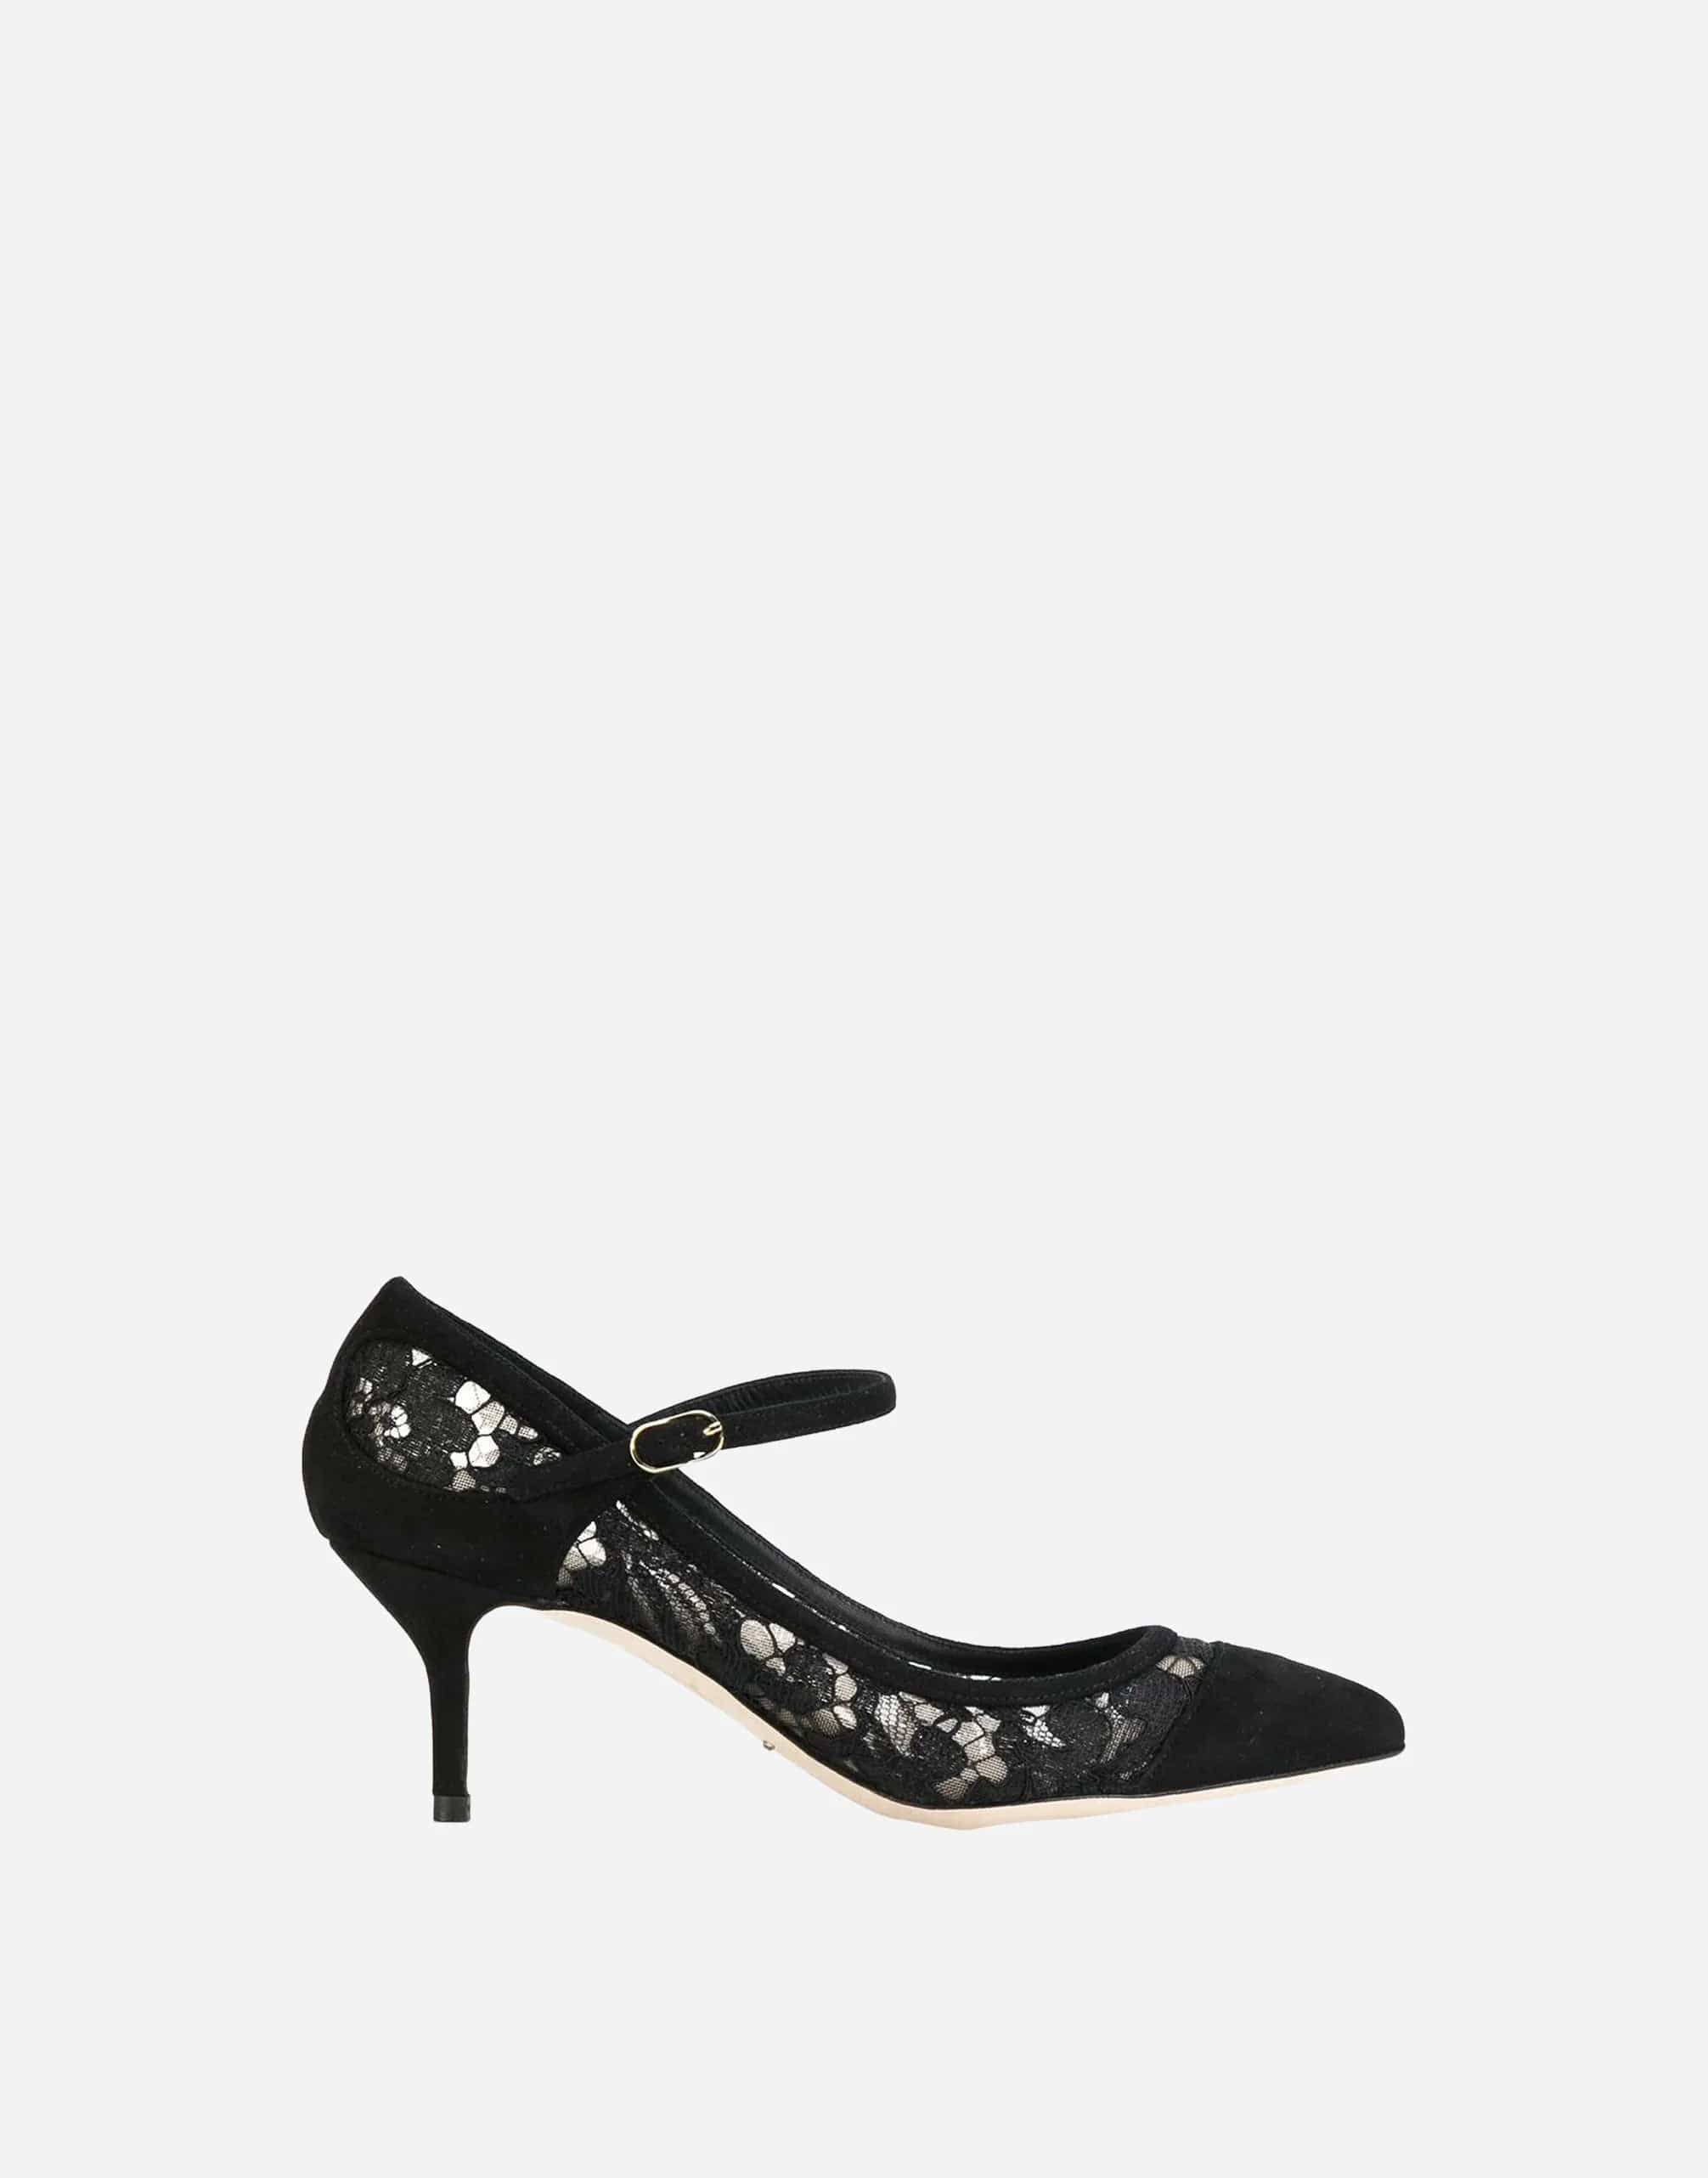 dolce gabbana mary jane sculpted heel pumps item, Women's Clothing, Dolce  & Gabbana Leggings with floral motif